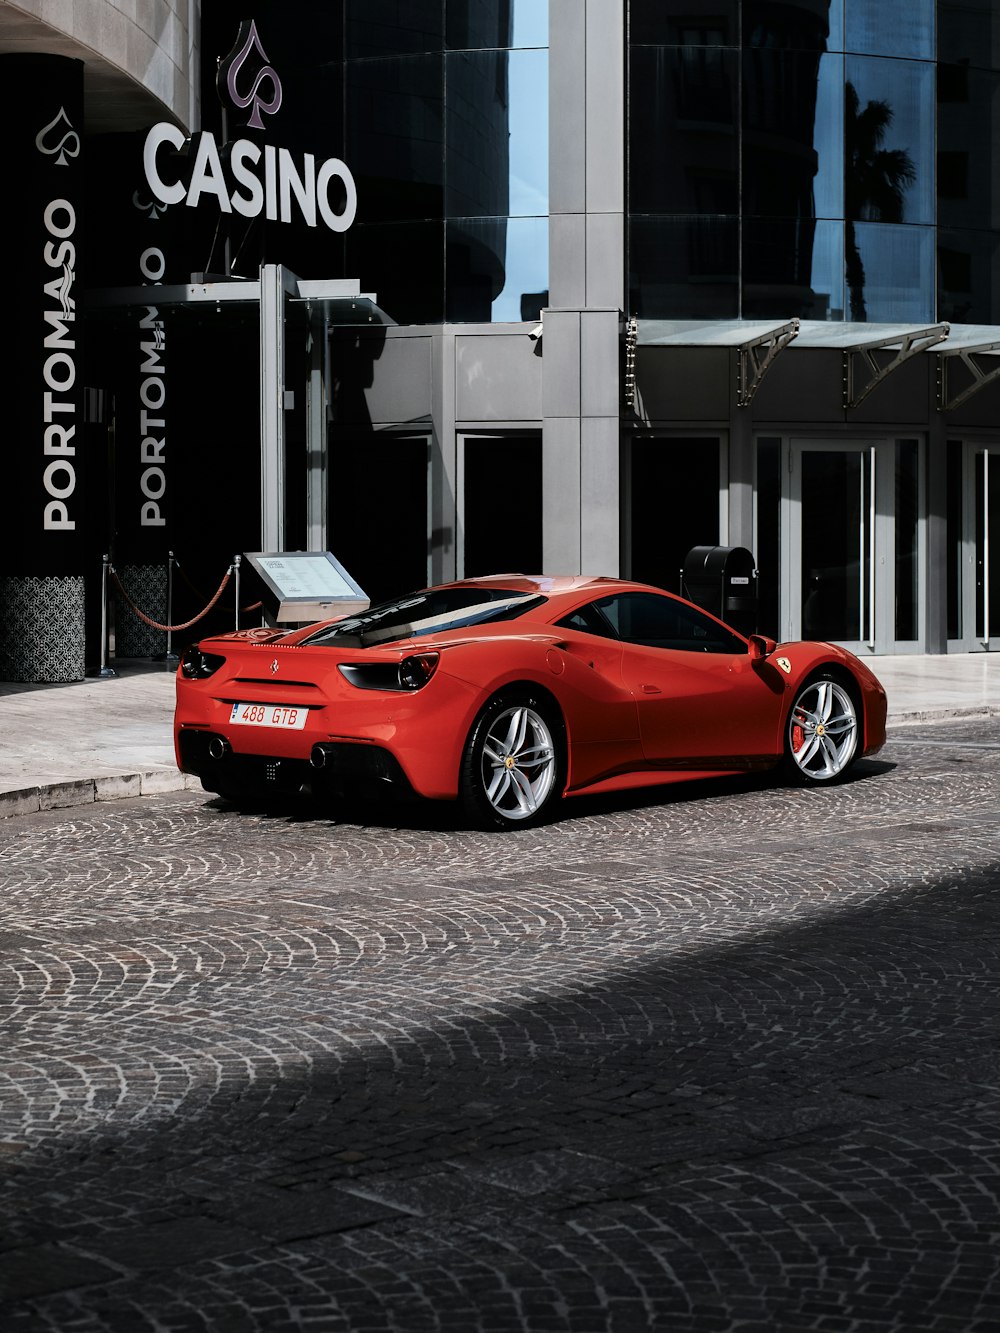 a red sports car parked in front of a casino